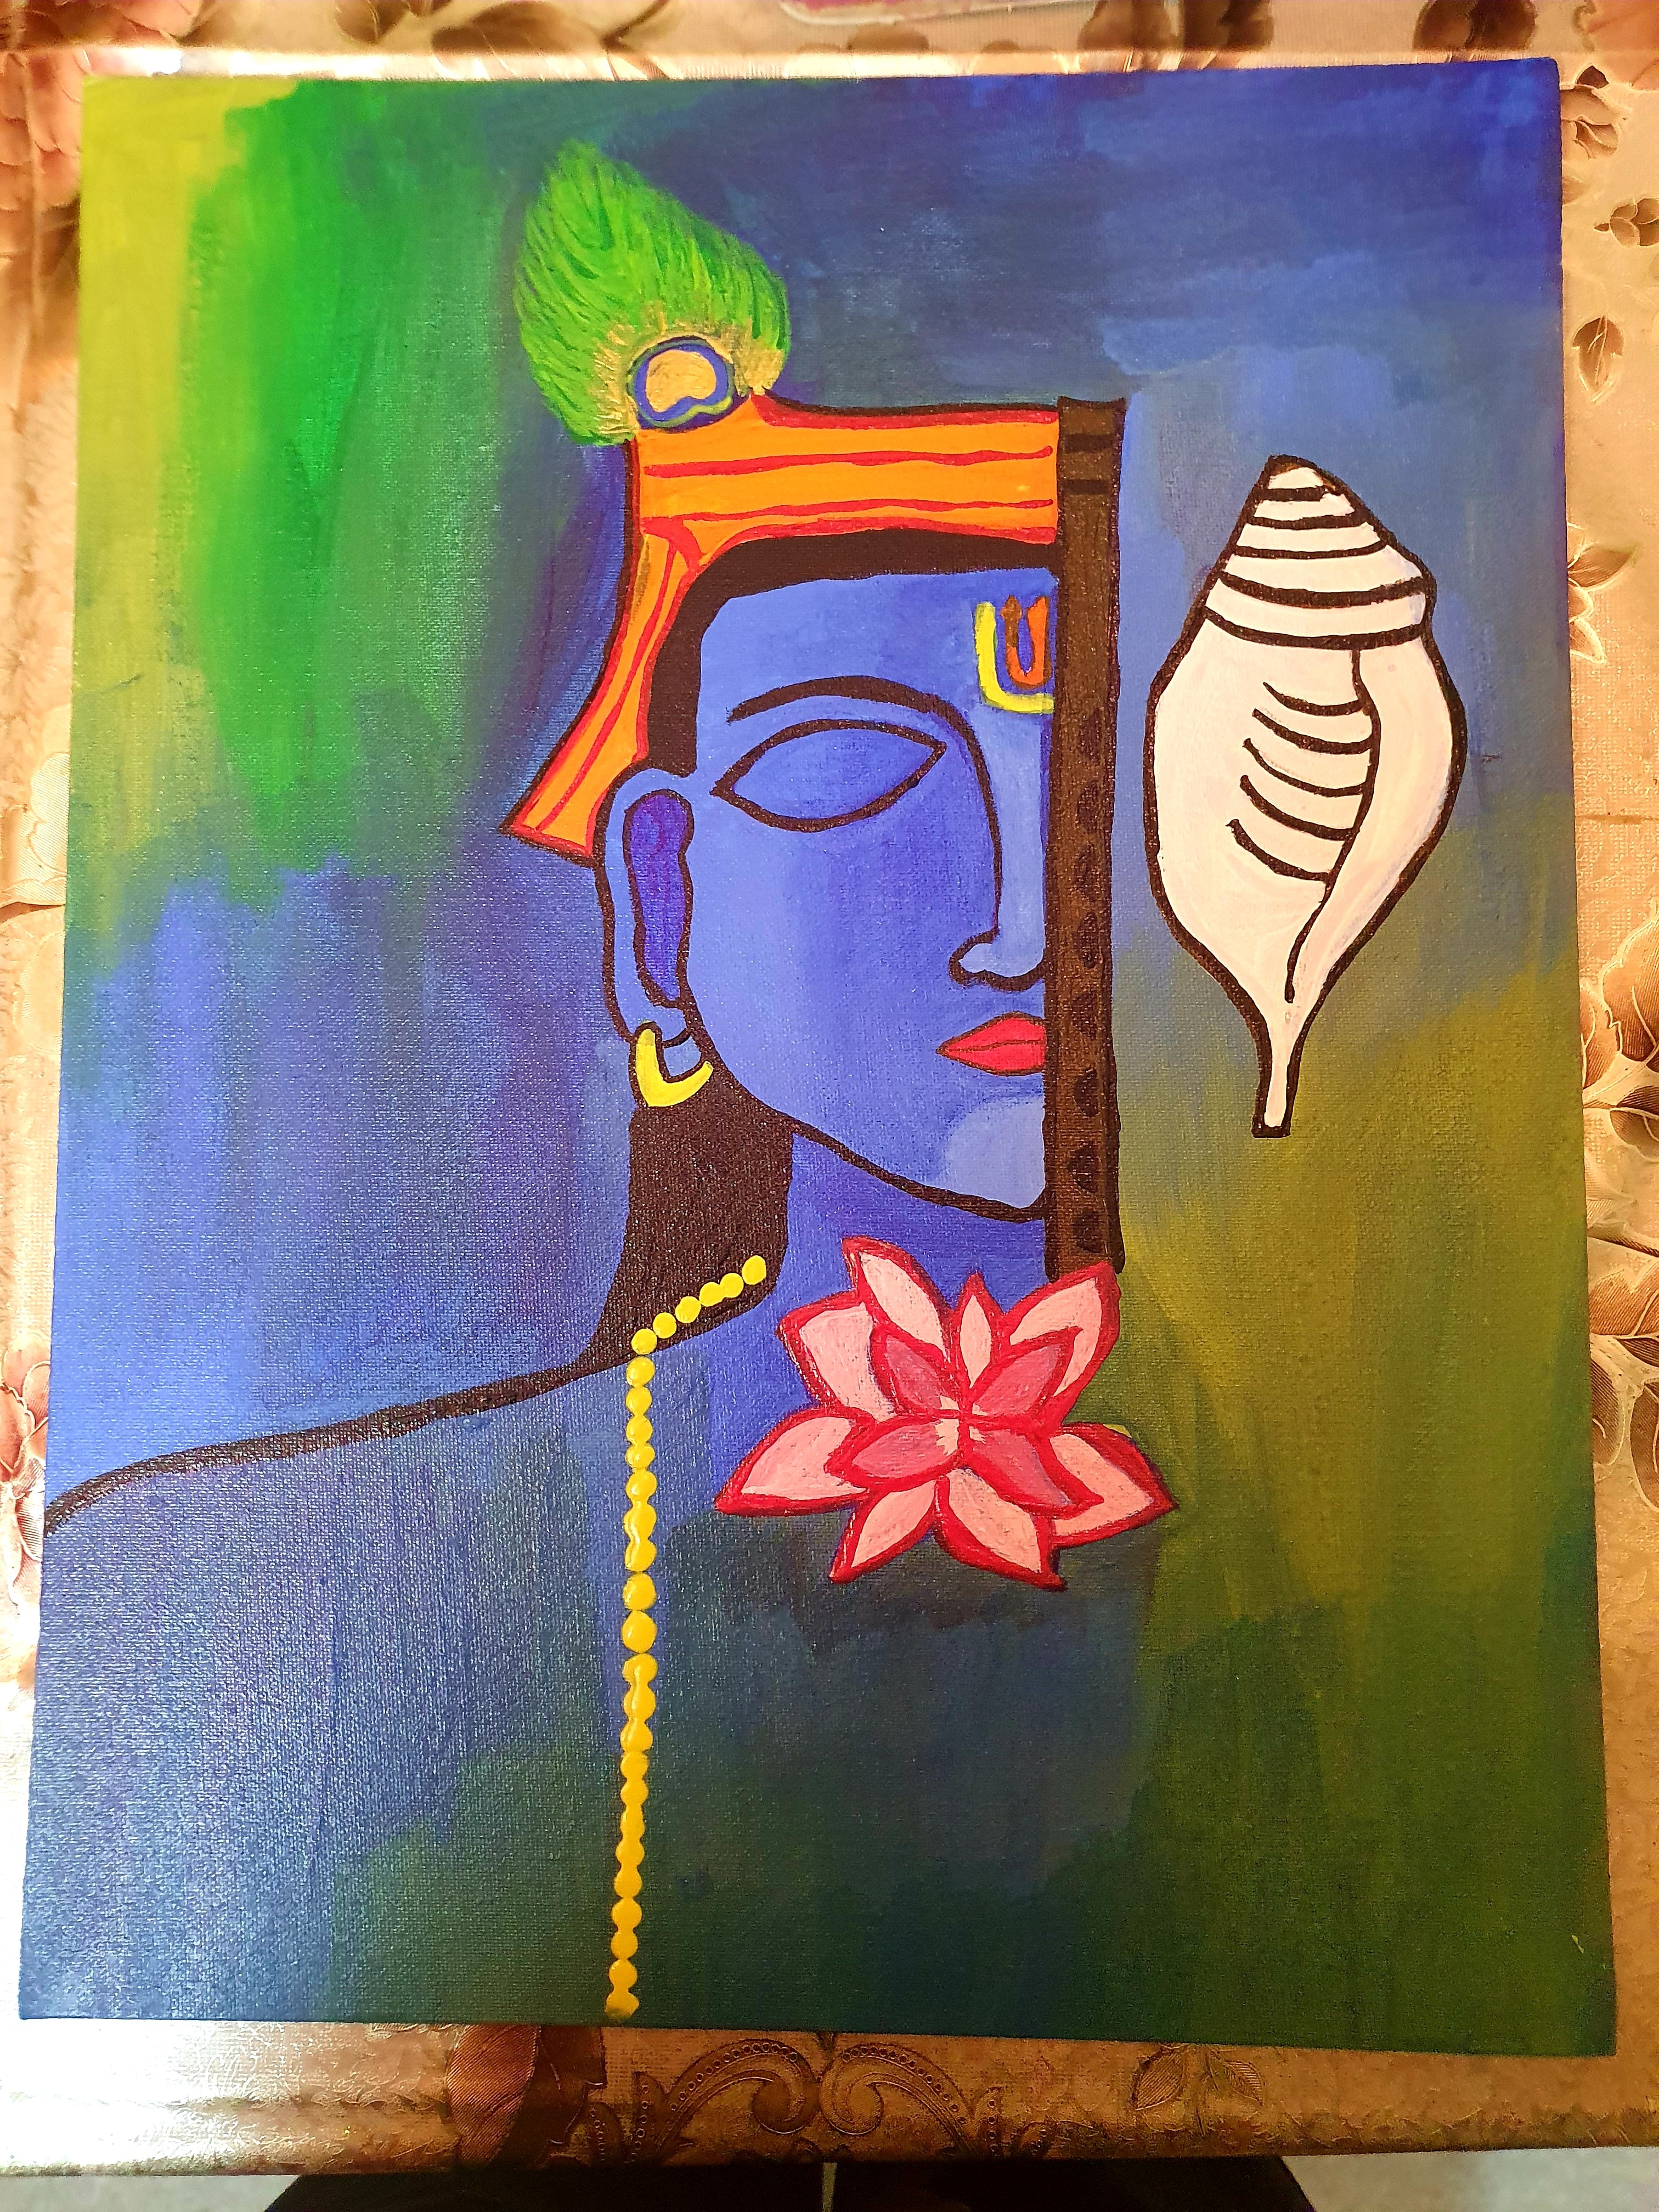 Design Process How I Made the Abstract Lord Krishna Painting  Wall of  Wonders